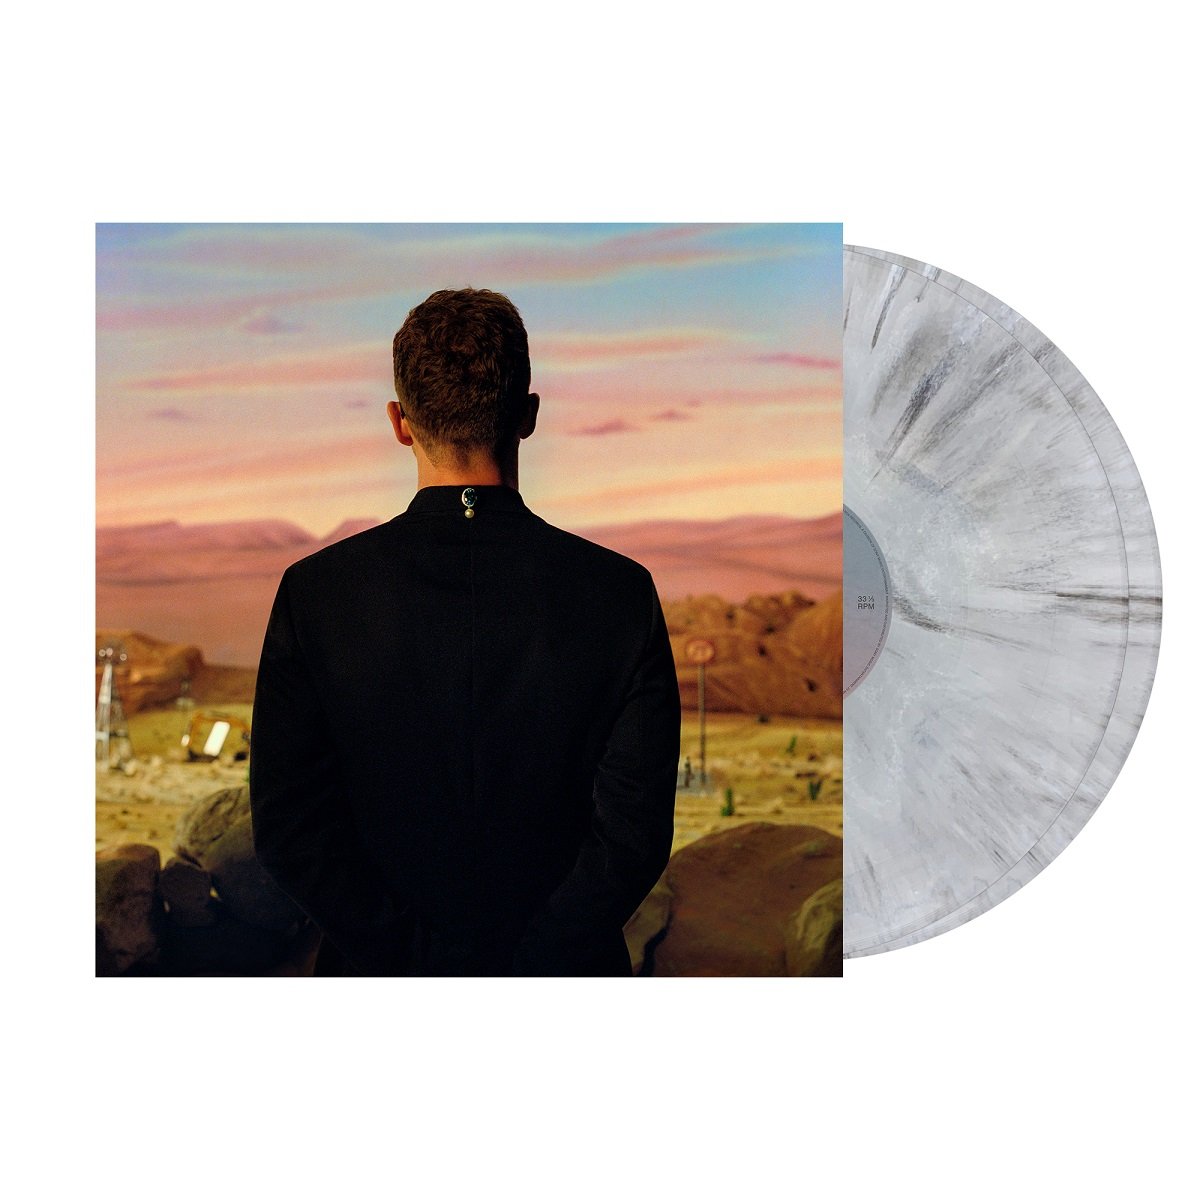 CD Shop - TIMBERLAKE, JUSTIN EVERYTHING I THOUGHT IT WAS / COLOURED VINYL, METALLIC SILVER